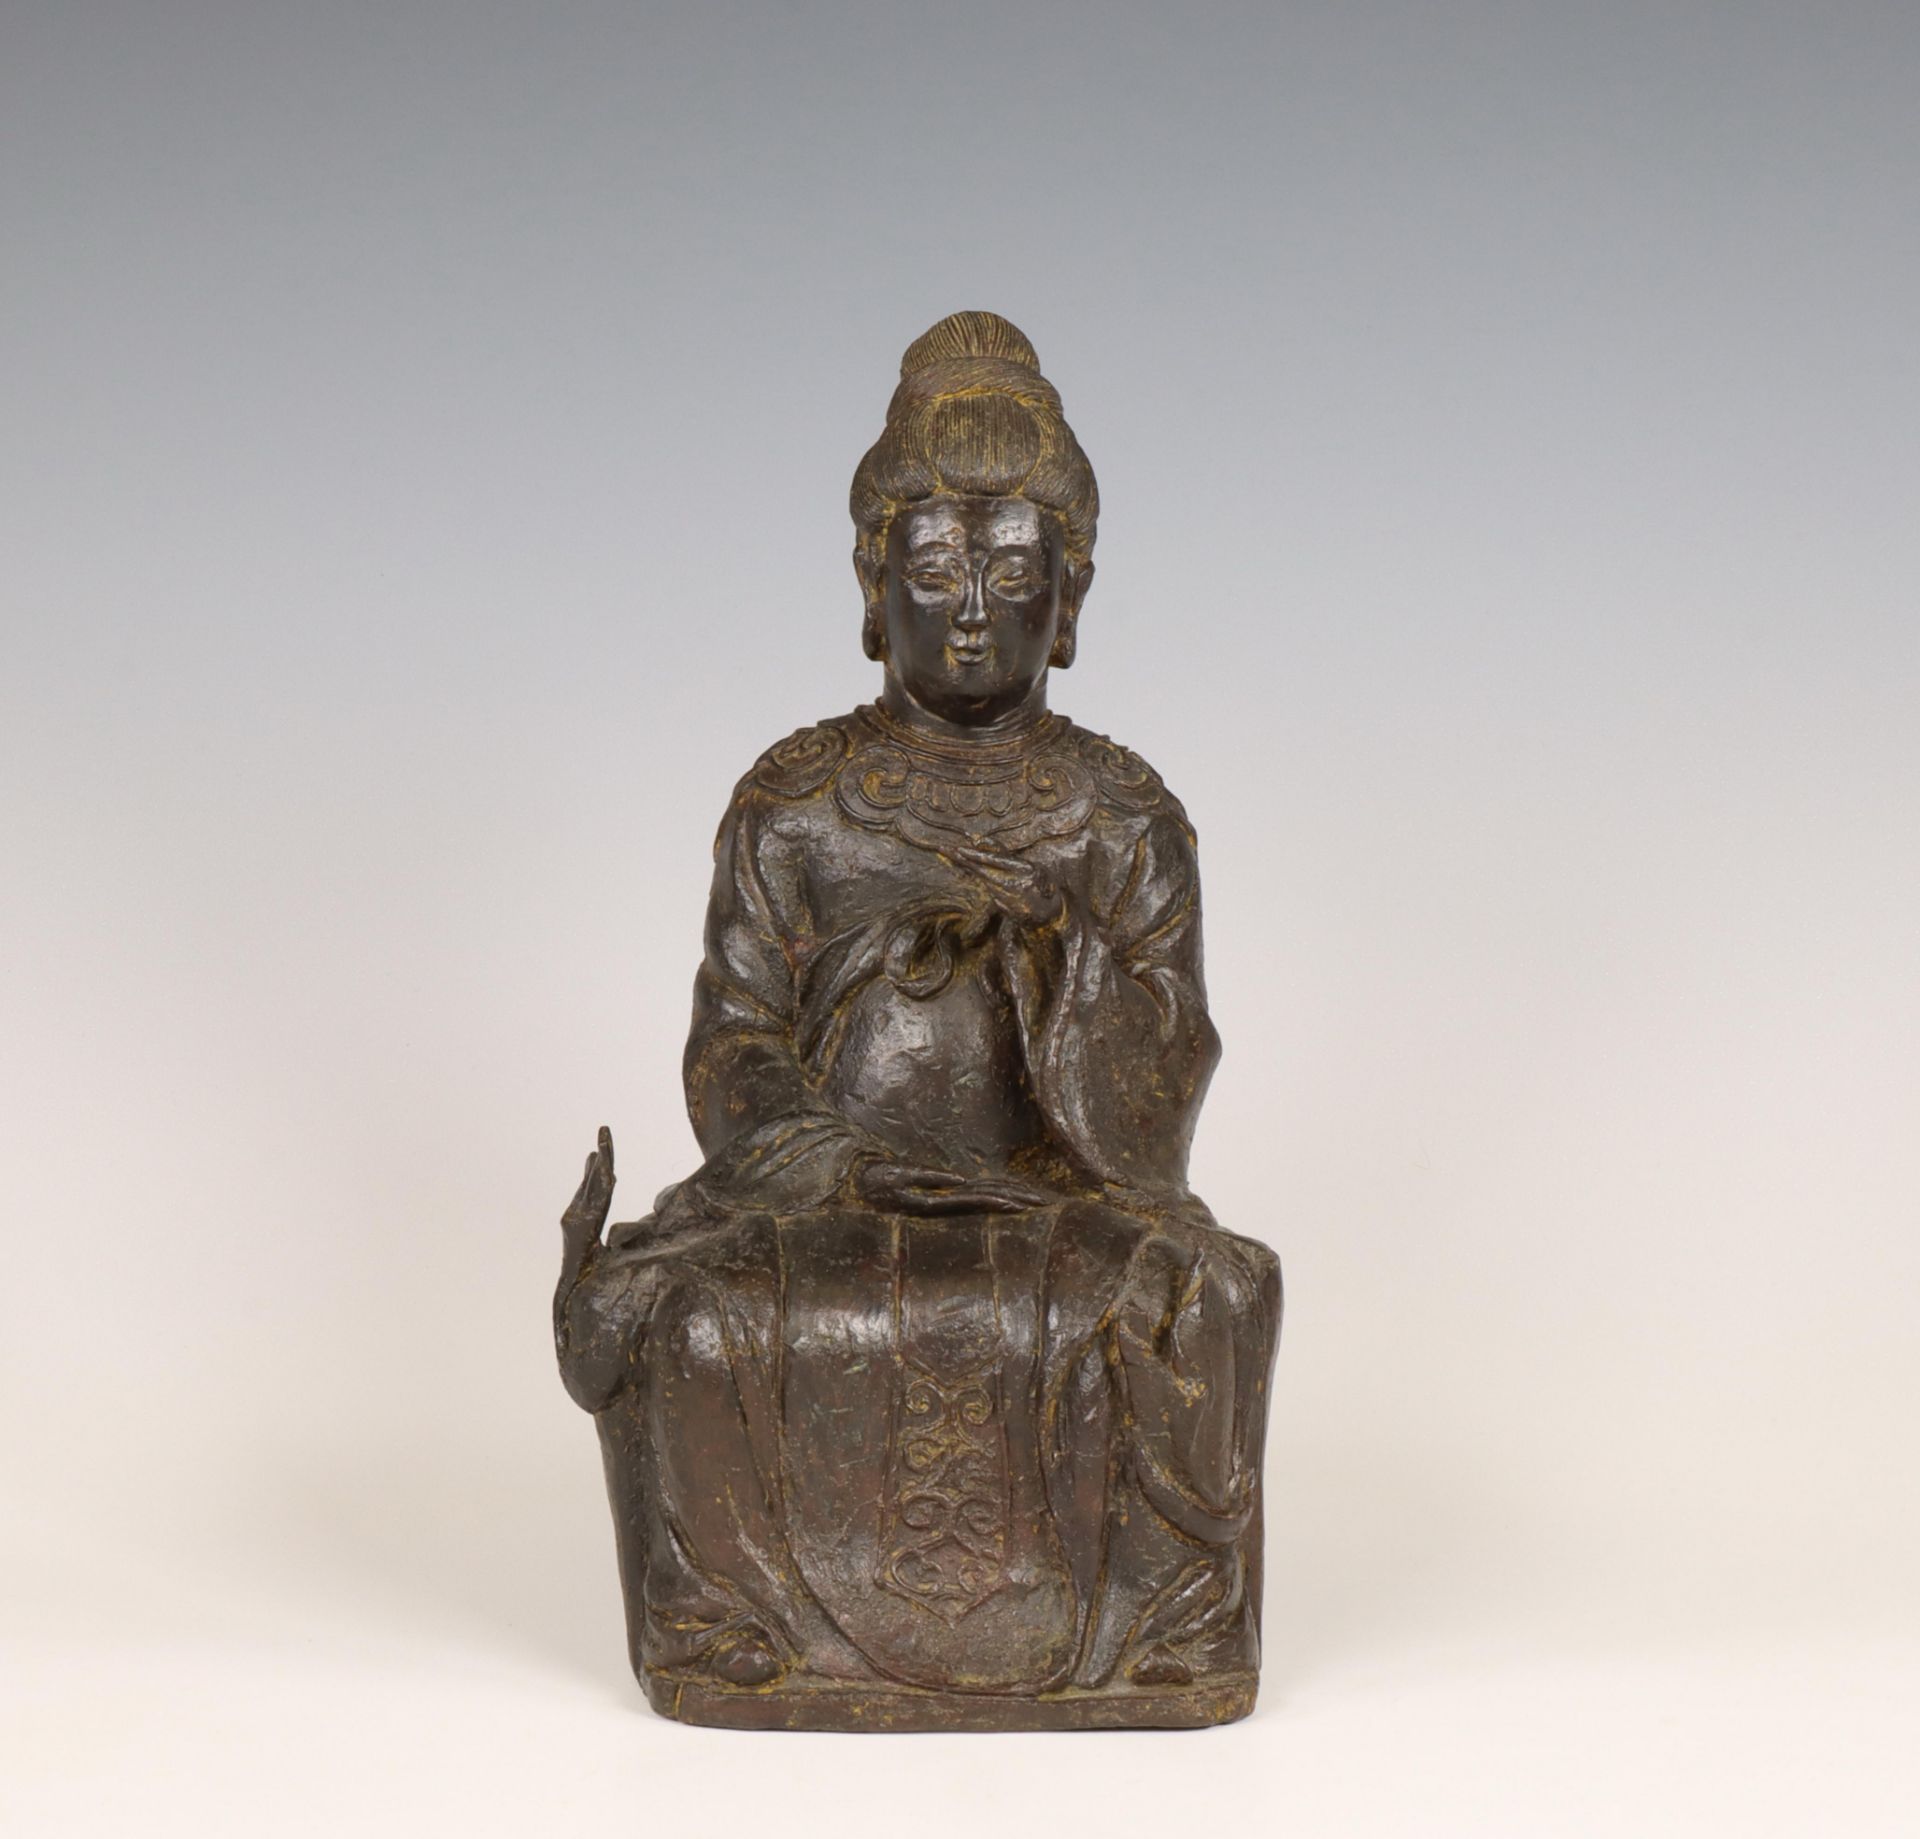 China, a bronze figure of a seated lady, Yuan-Ming dynasty, ca. 14th century,